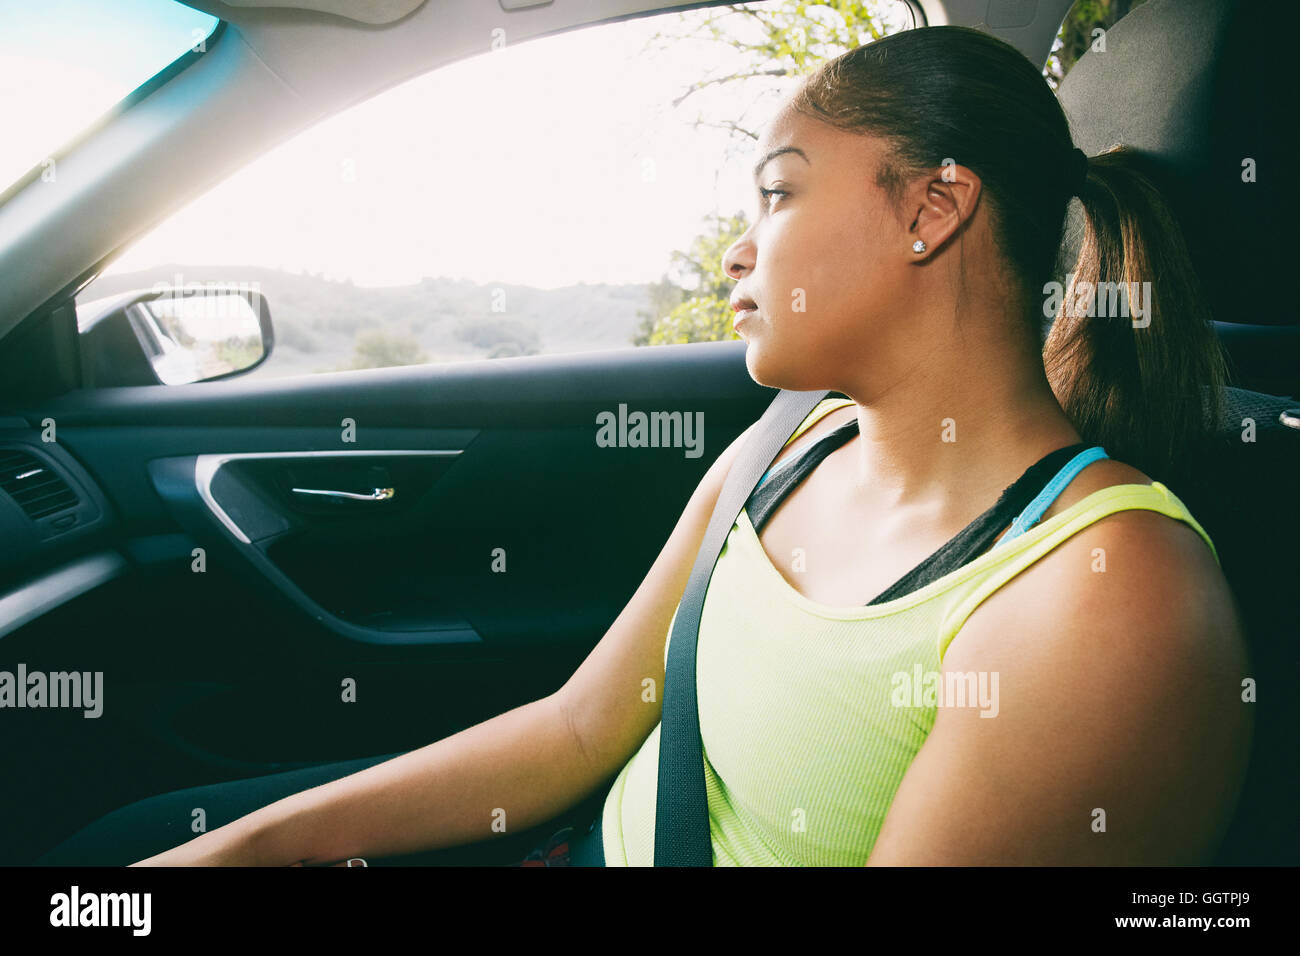 Mixed Race woman daydreaming in car Stock Photo